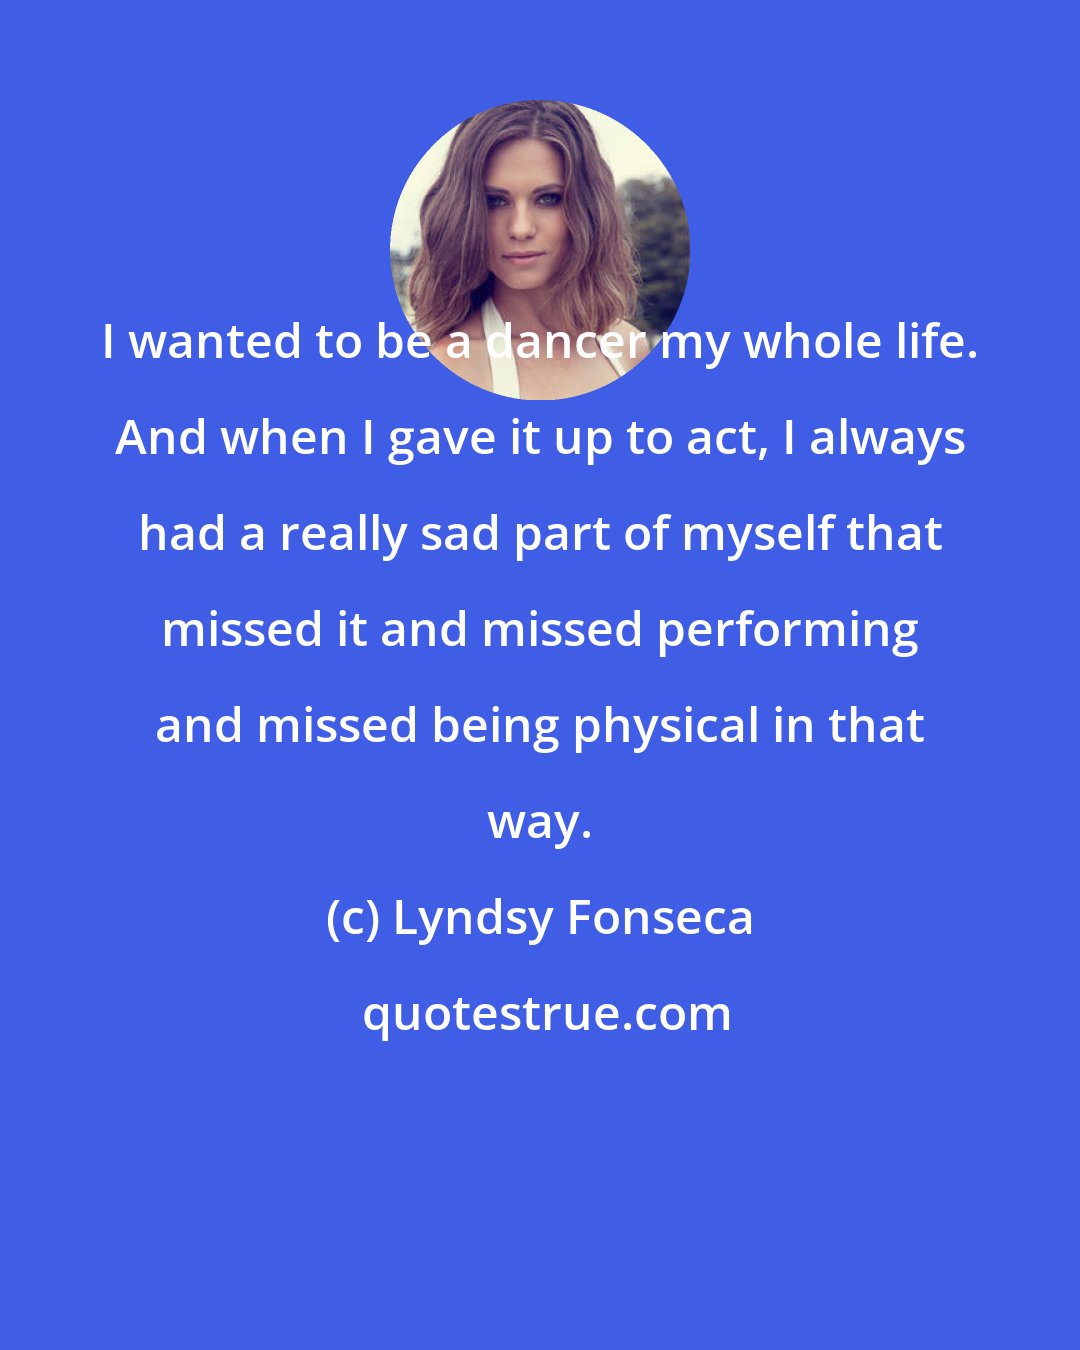 Lyndsy Fonseca: I wanted to be a dancer my whole life. And when I gave it up to act, I always had a really sad part of myself that missed it and missed performing and missed being physical in that way.